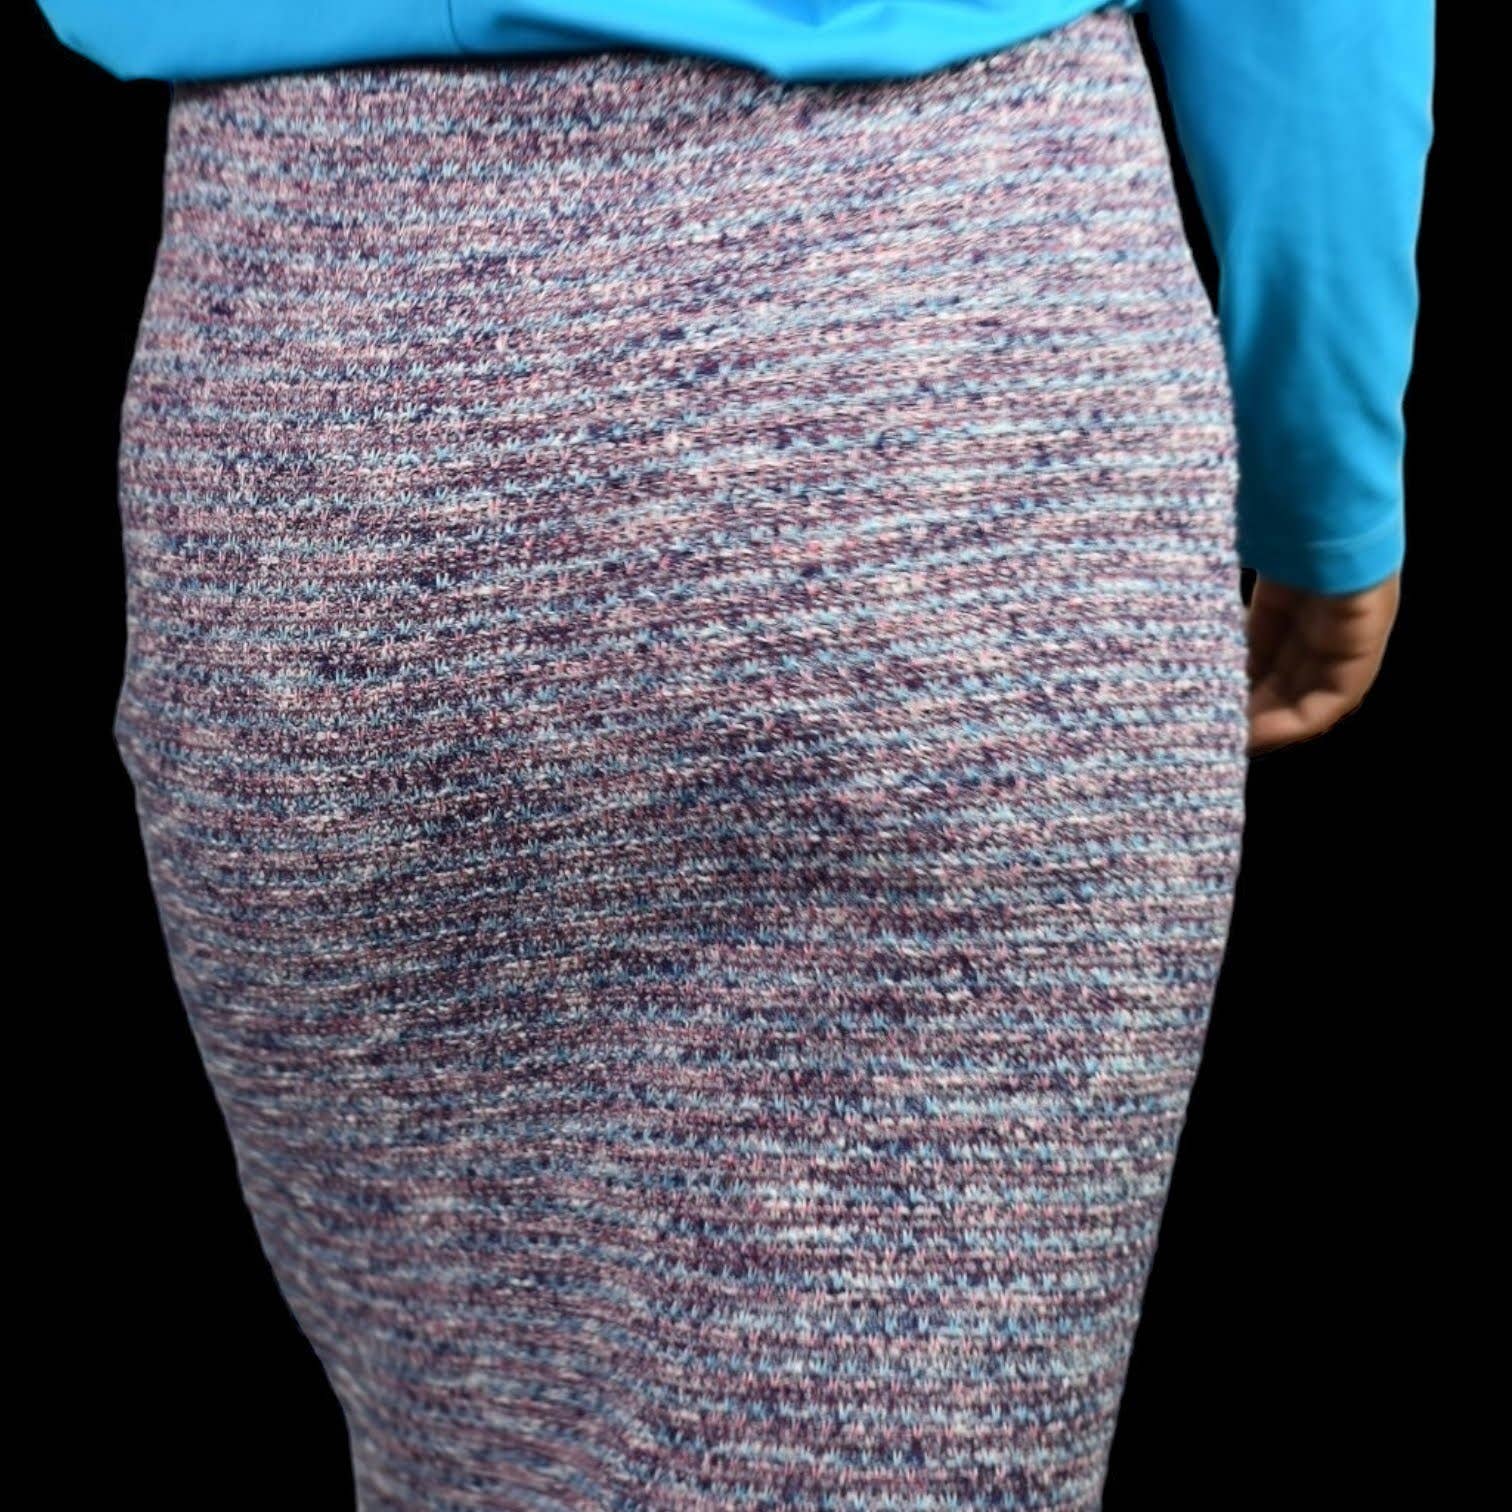 Band of Outsiders Skirt Blue Knit Stretch Pencil Tweed Knee Length Zippers Girl Size Medium